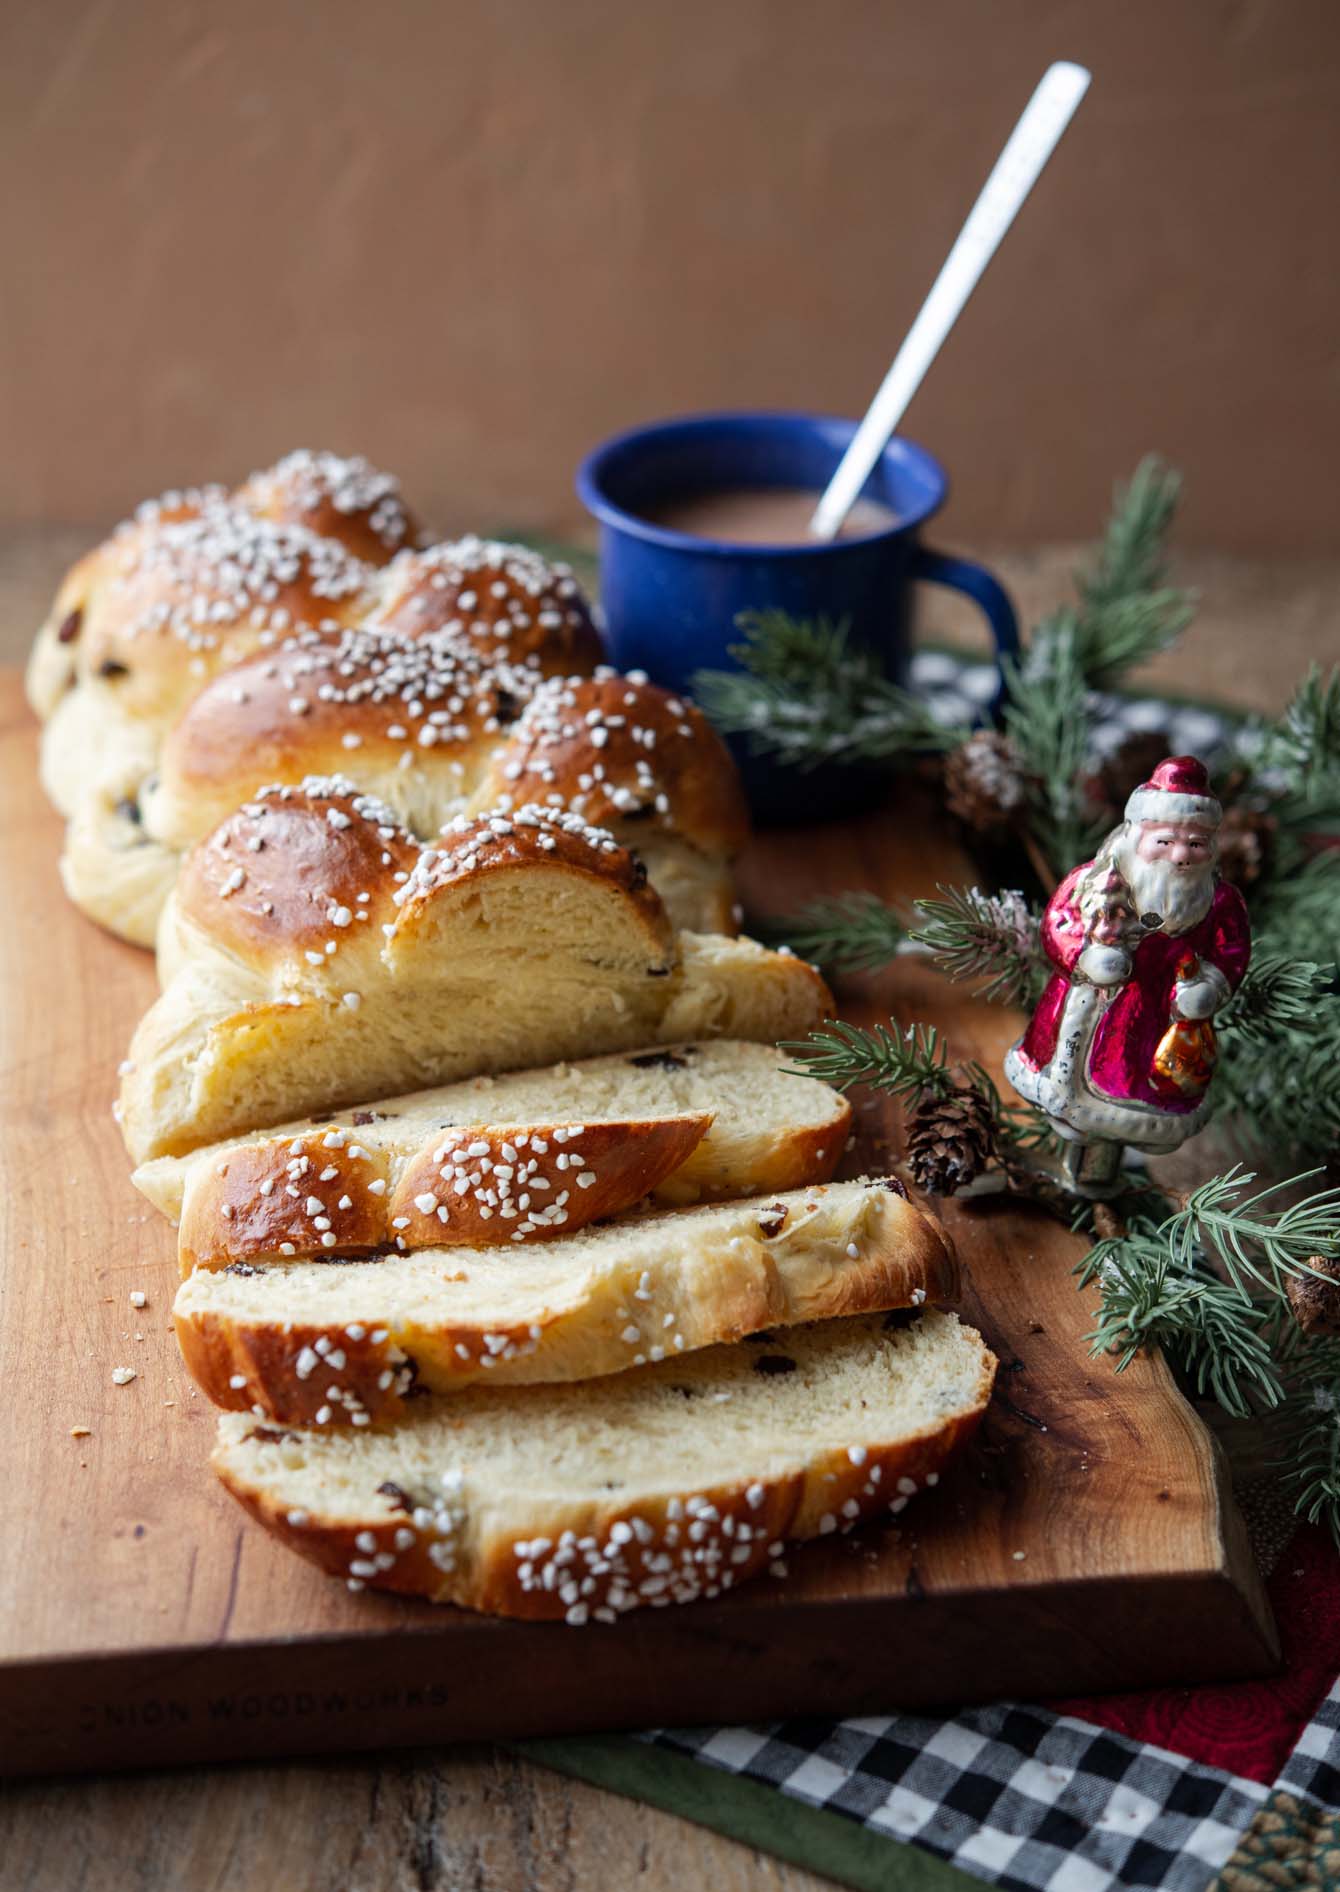 Holiday braided pulla bread served with homemade hot chocolate.